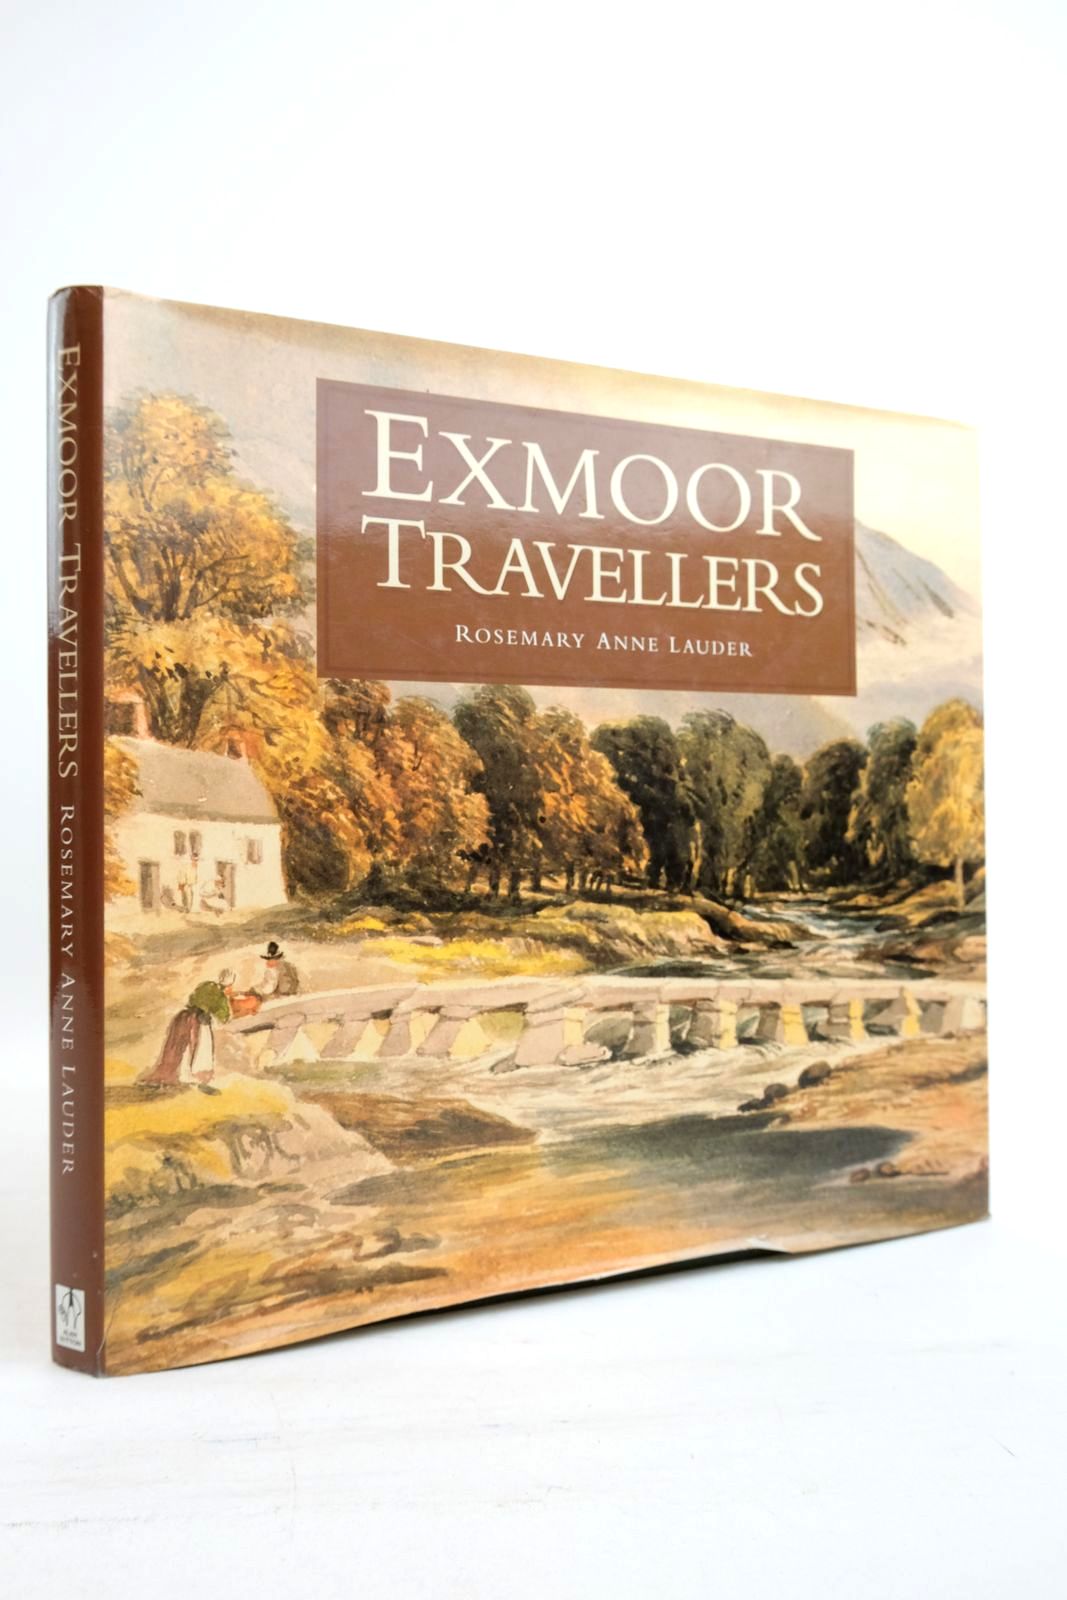 Photo of EXMOOR TRAVELLERS written by Lauder, Rosemary Anne published by Alan Sutton (STOCK CODE: 2134592)  for sale by Stella & Rose's Books